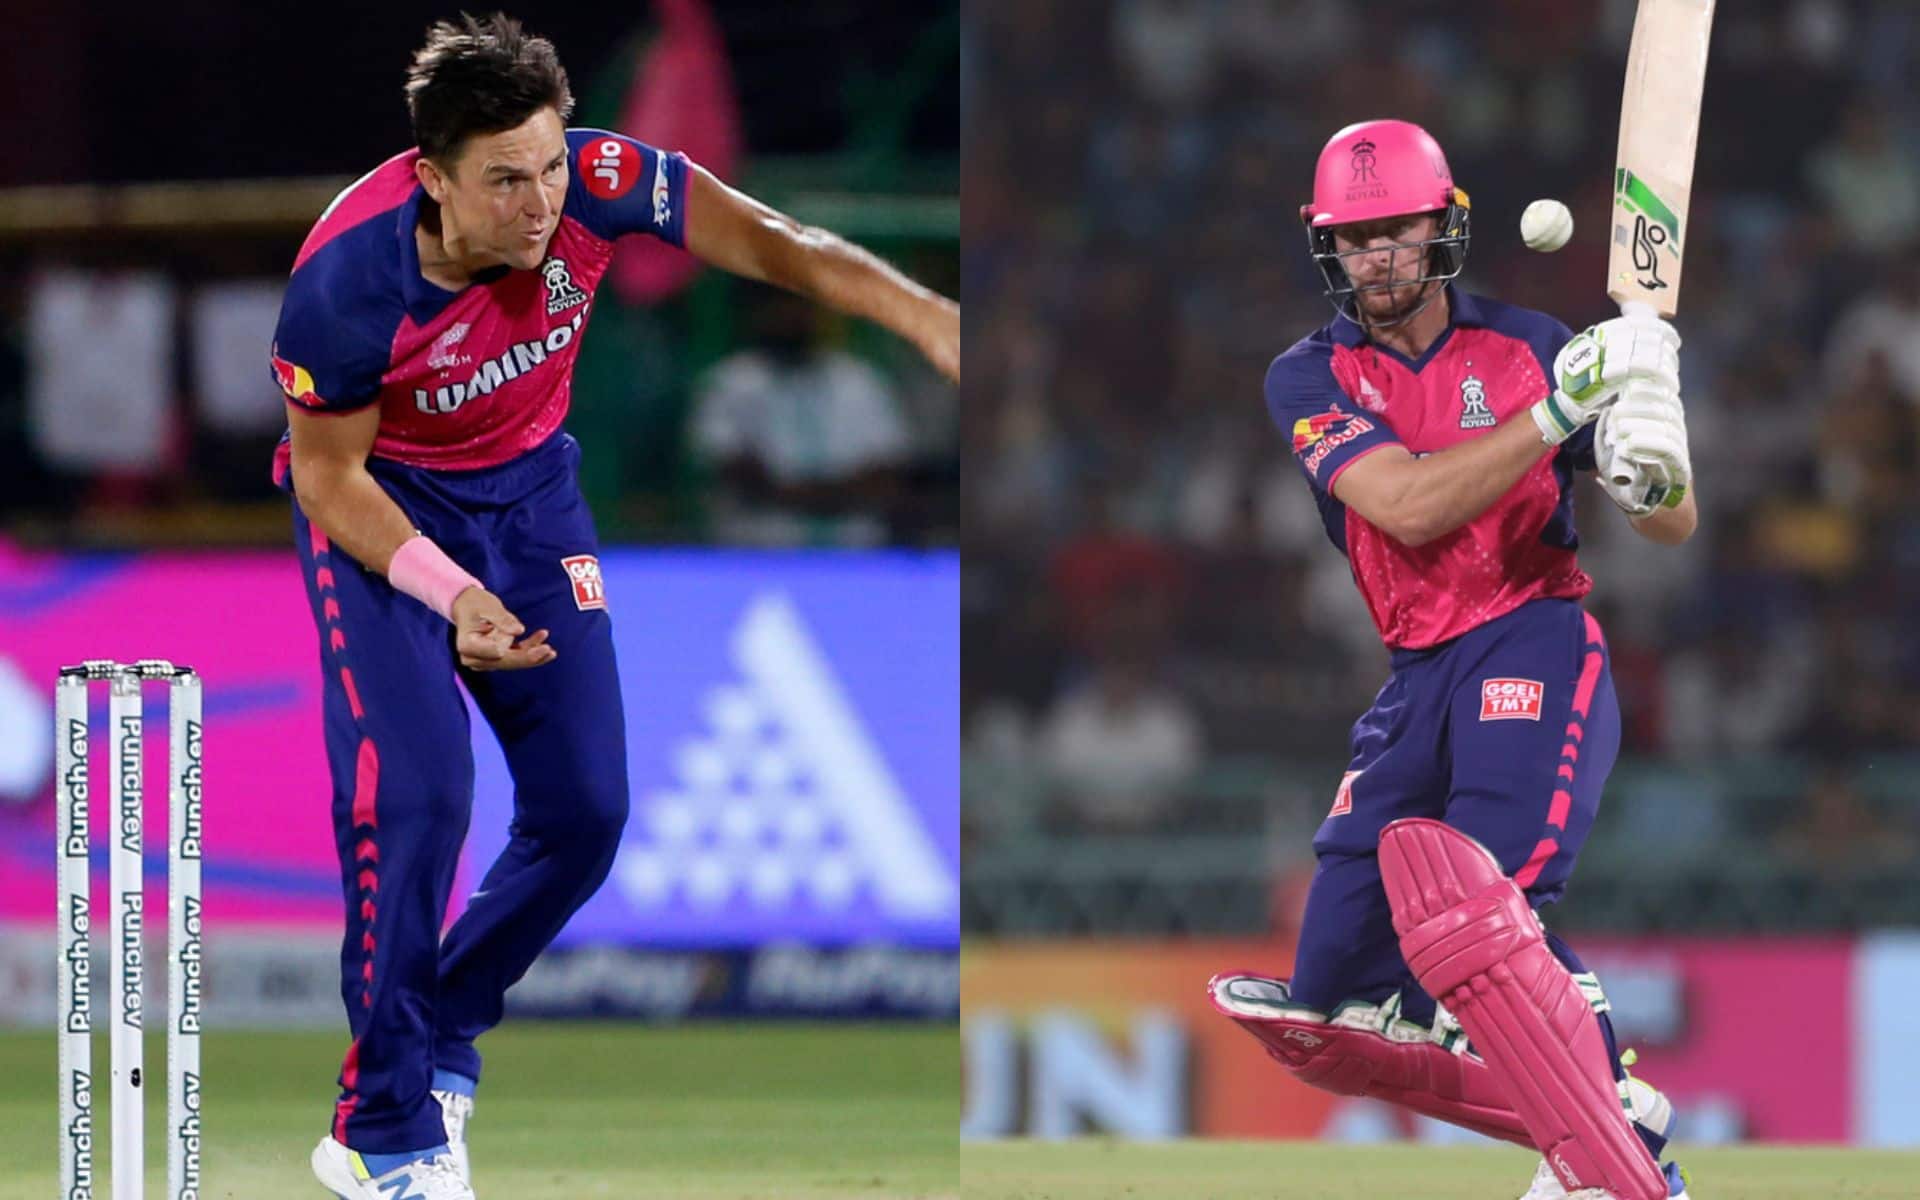 Trent Boult and Jos Buttler will play a key role for the Royals in this game [AP Photos]